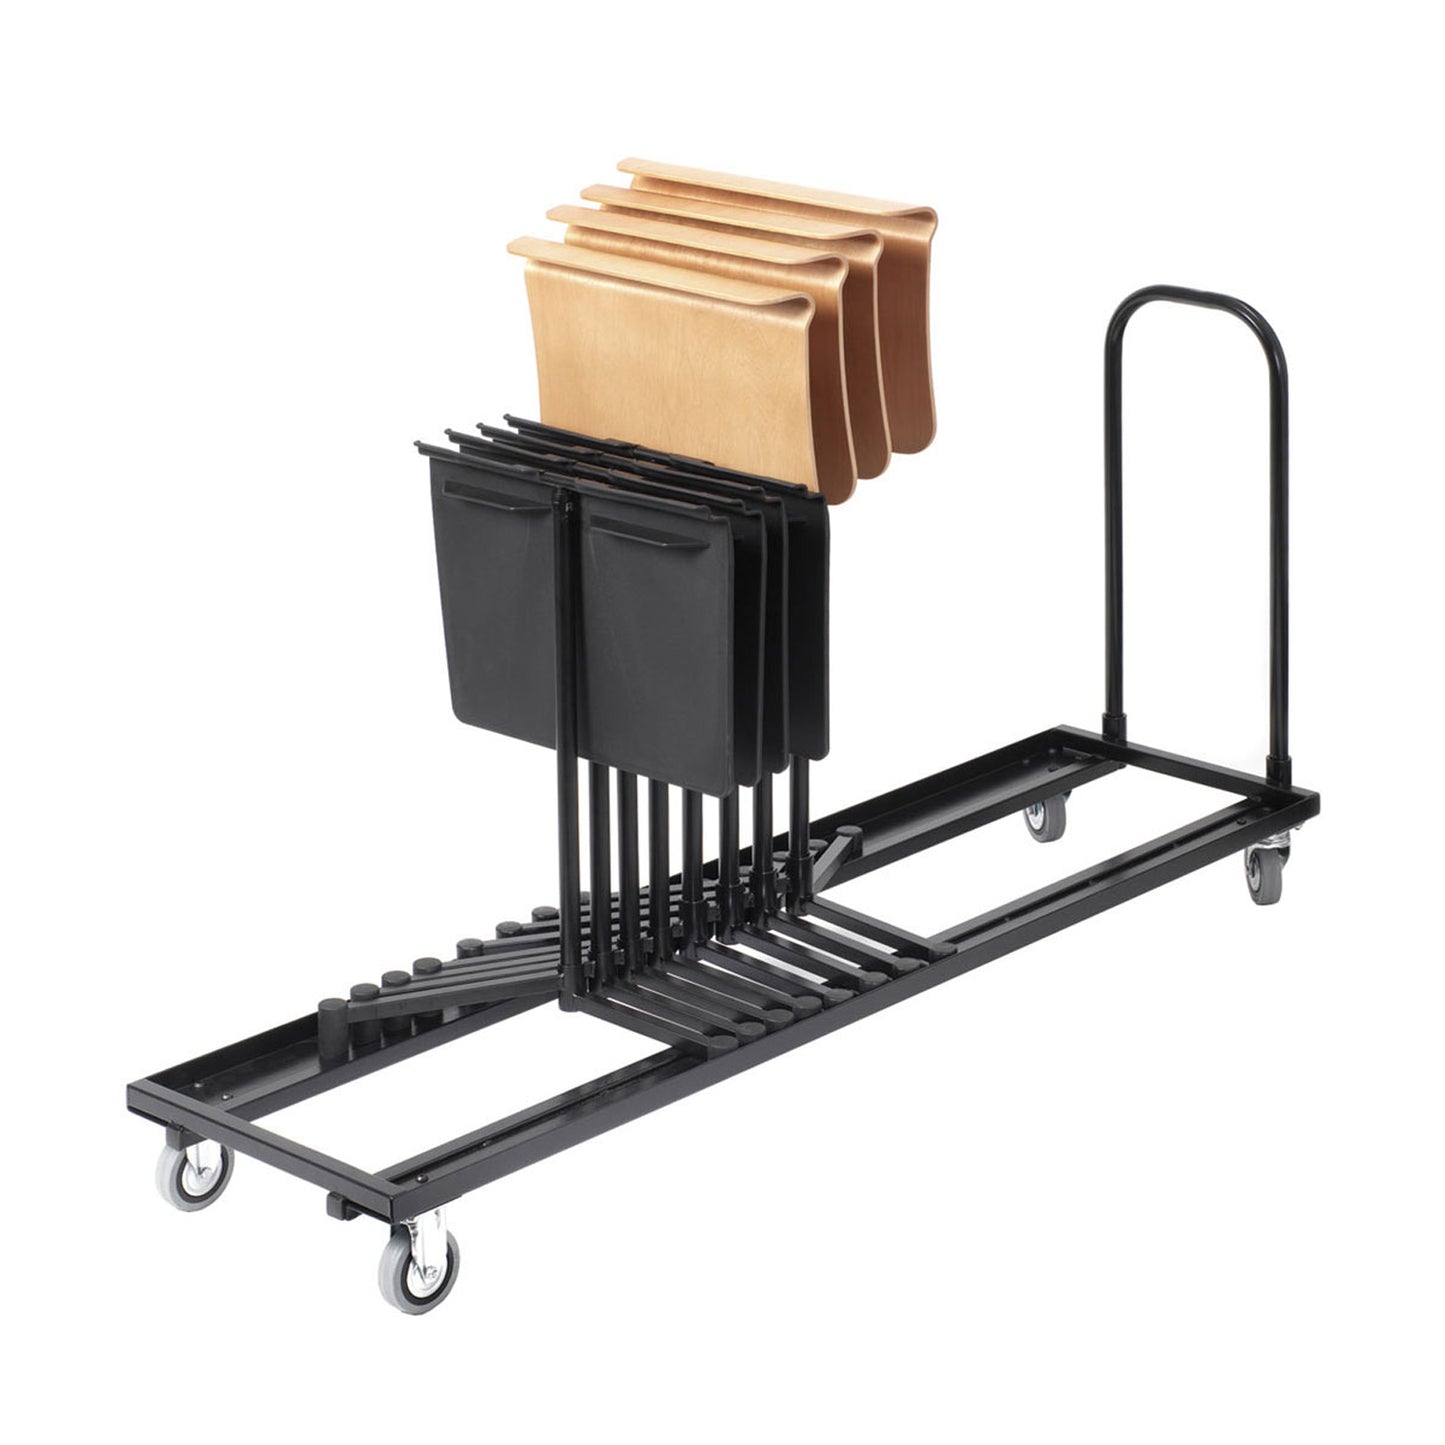 RAT Stand Performer 3 Trolley